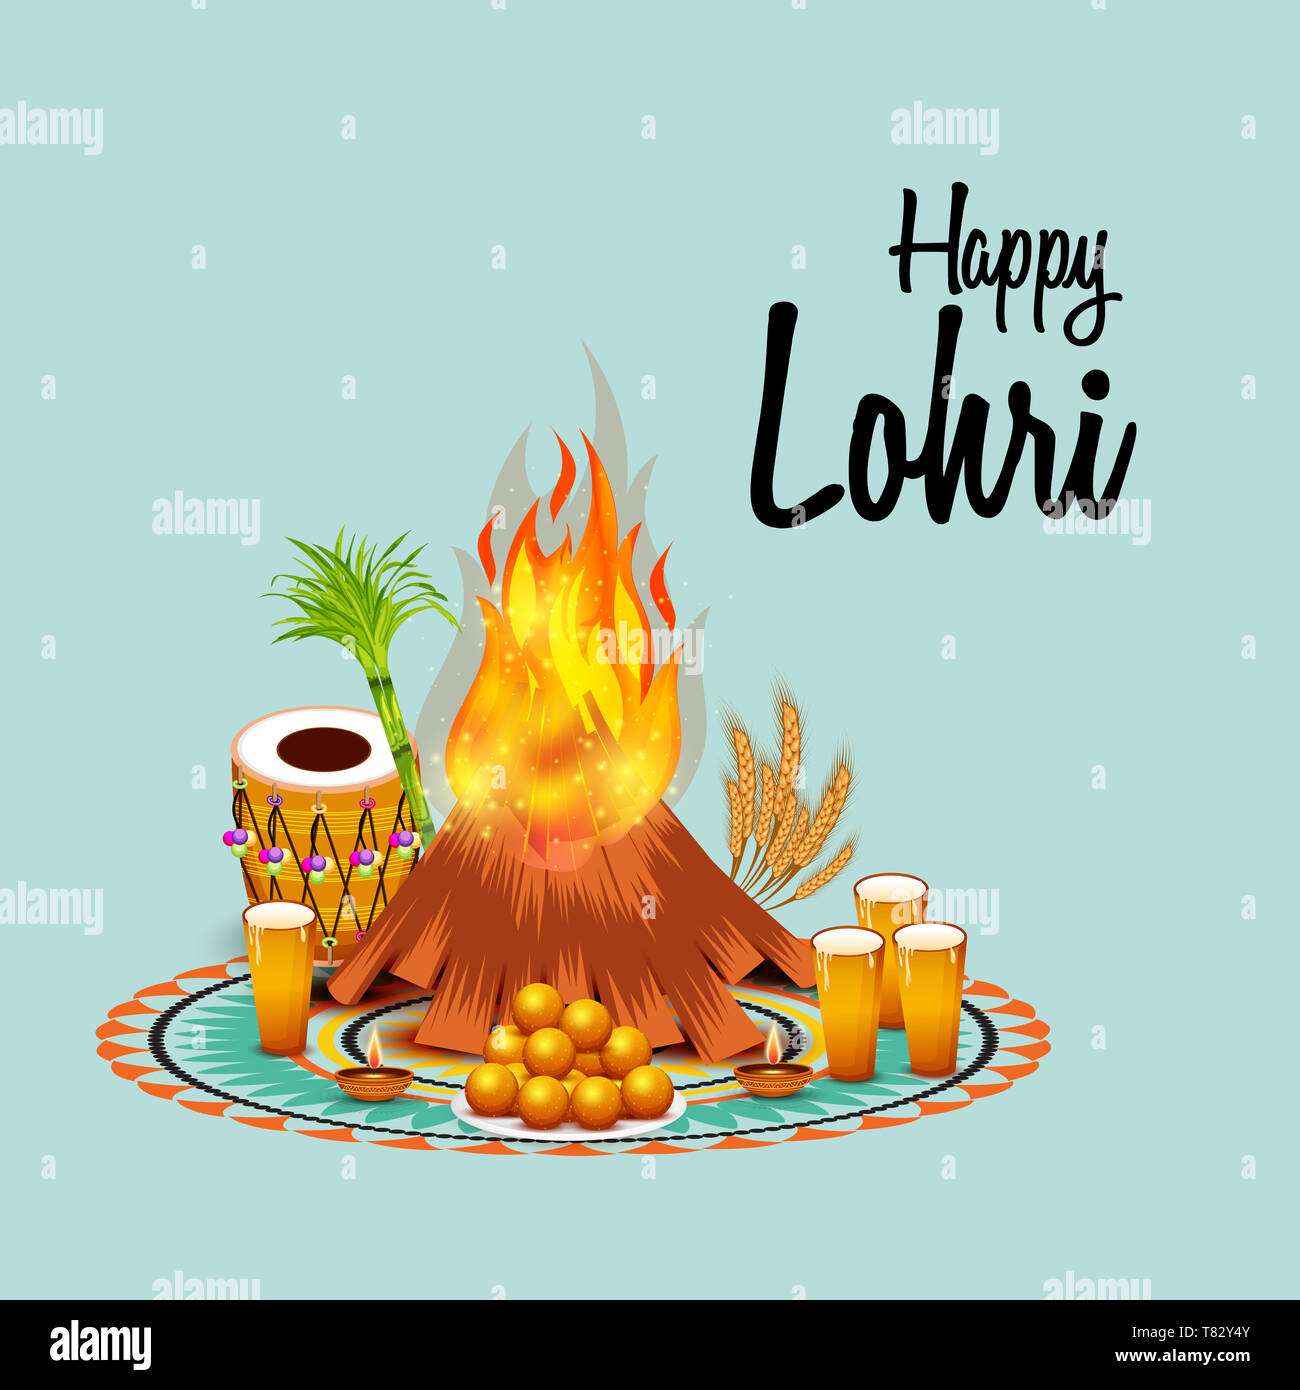 Vector illustration of a Background for Happy Lohri Stock Photo - Alamy